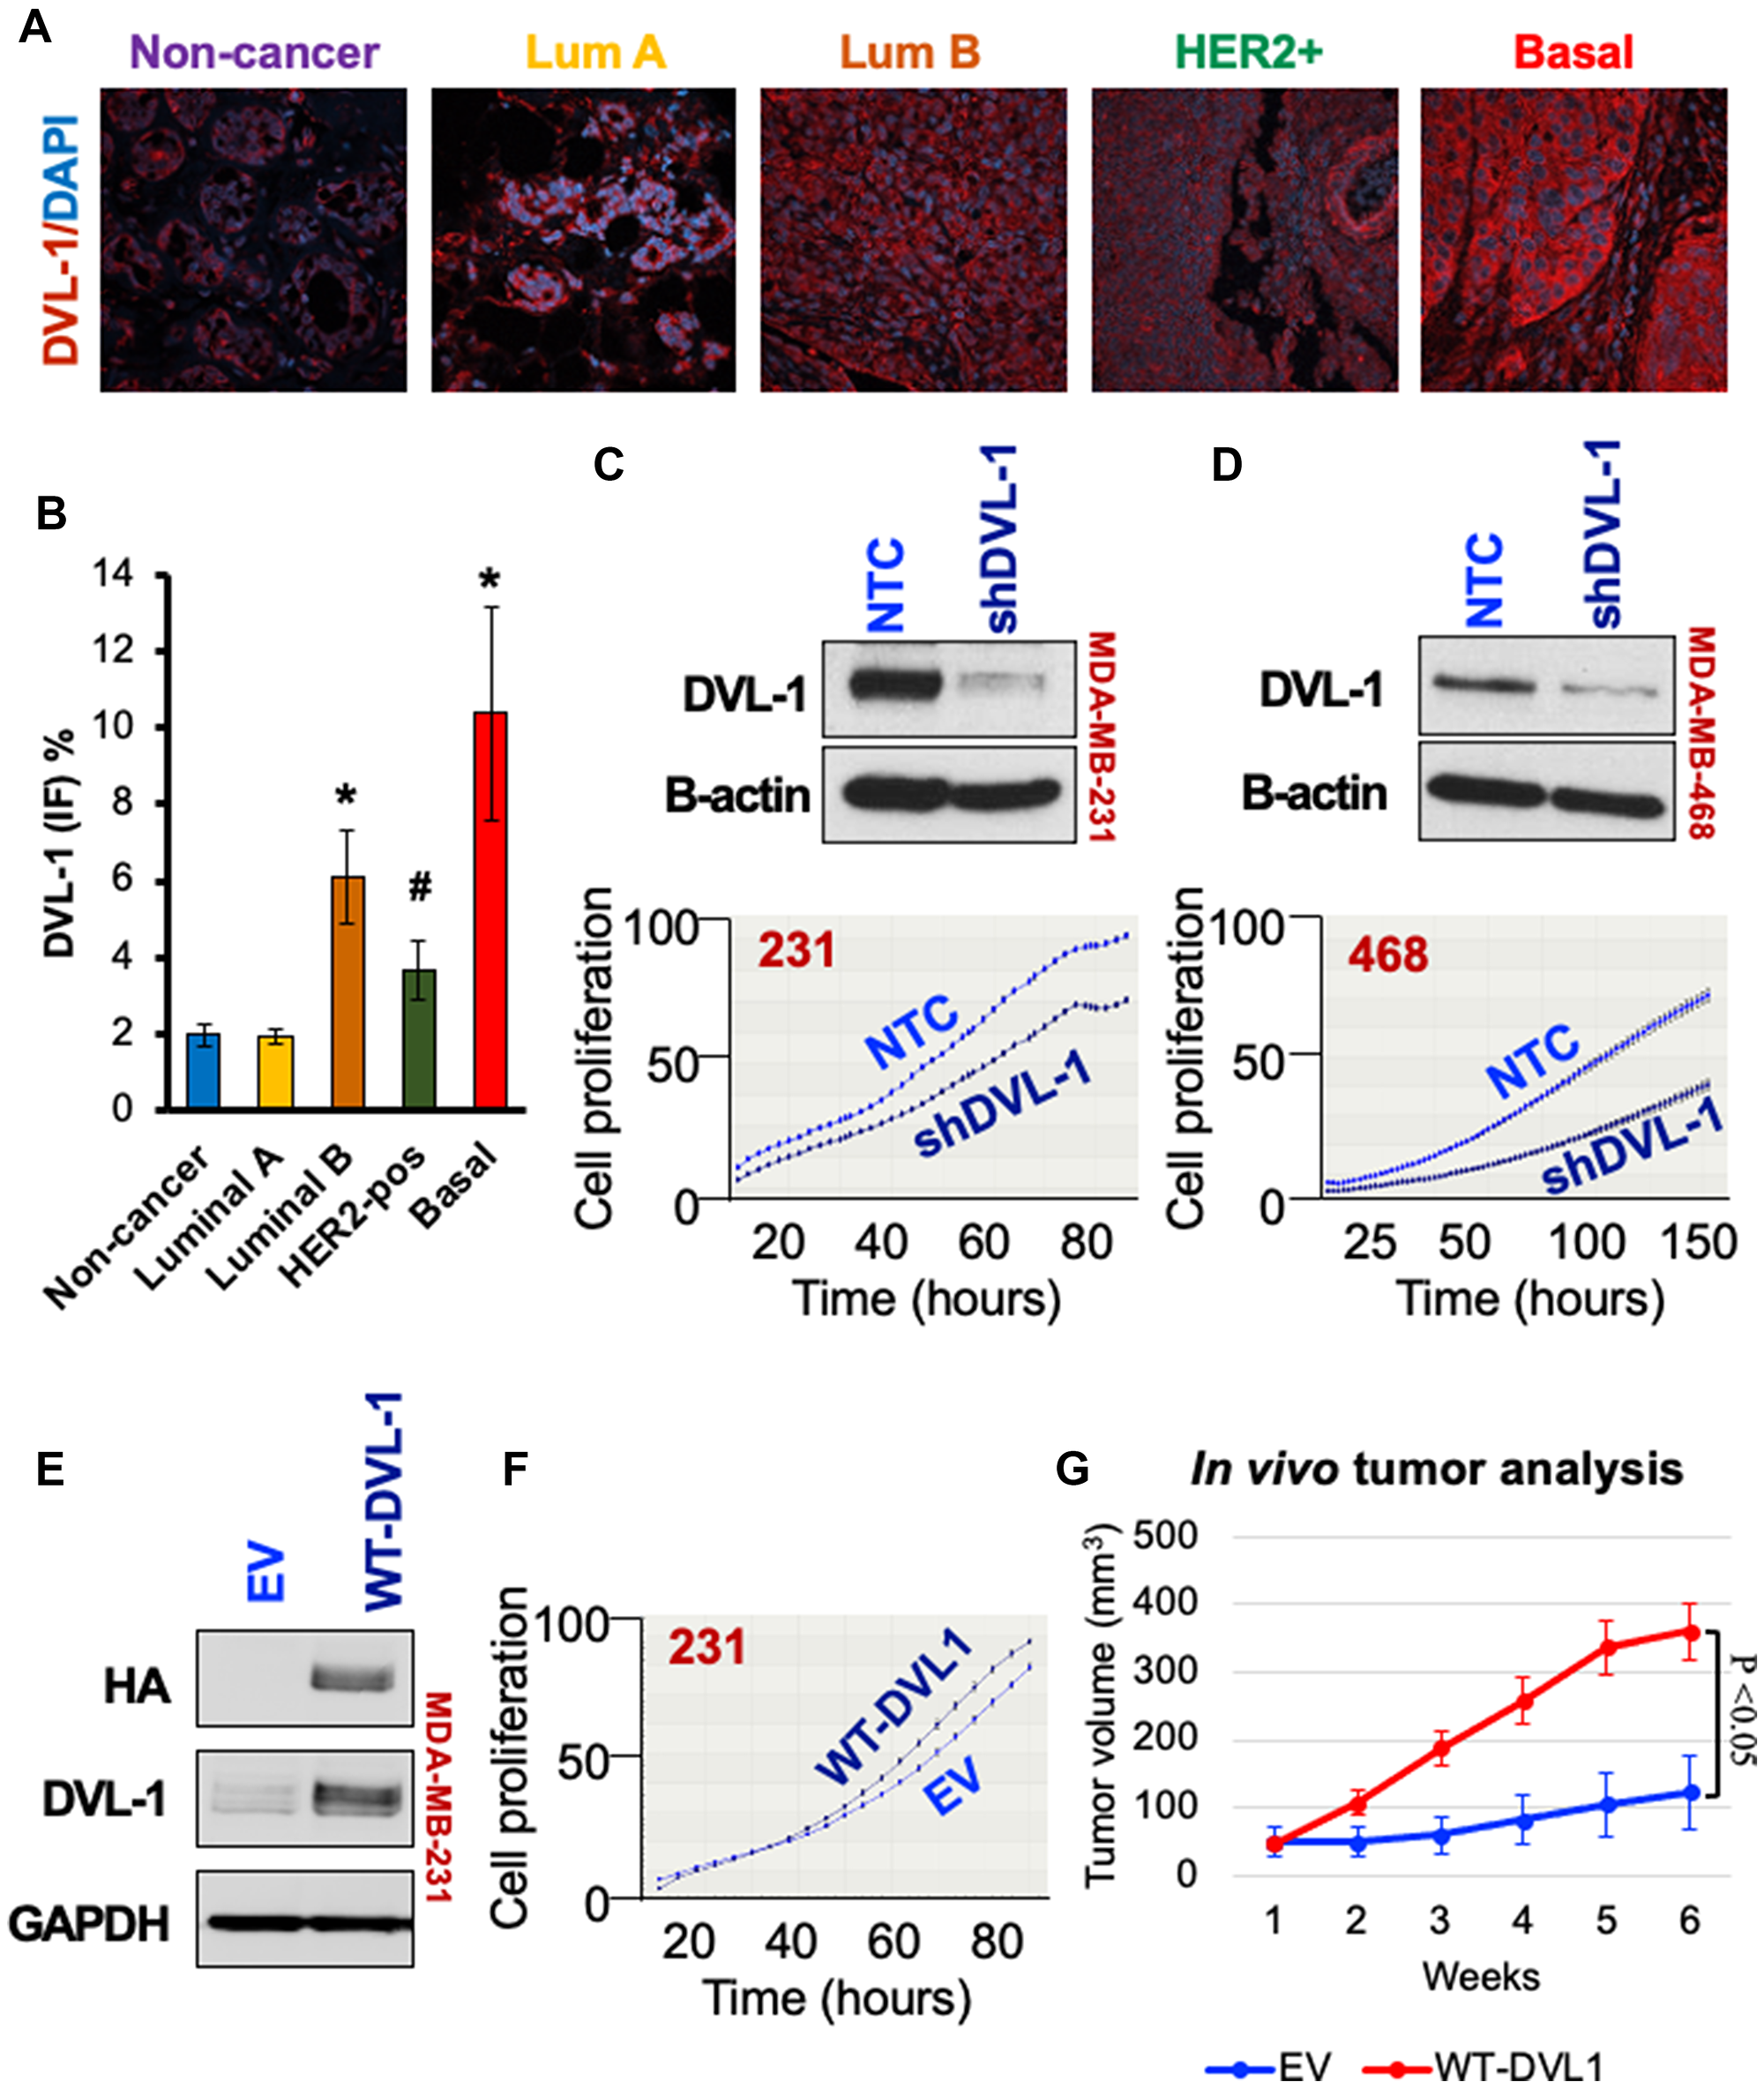 High DVL-1 expression promotes cell proliferation and xenograft tumor growth in triple-negative breast cancer.